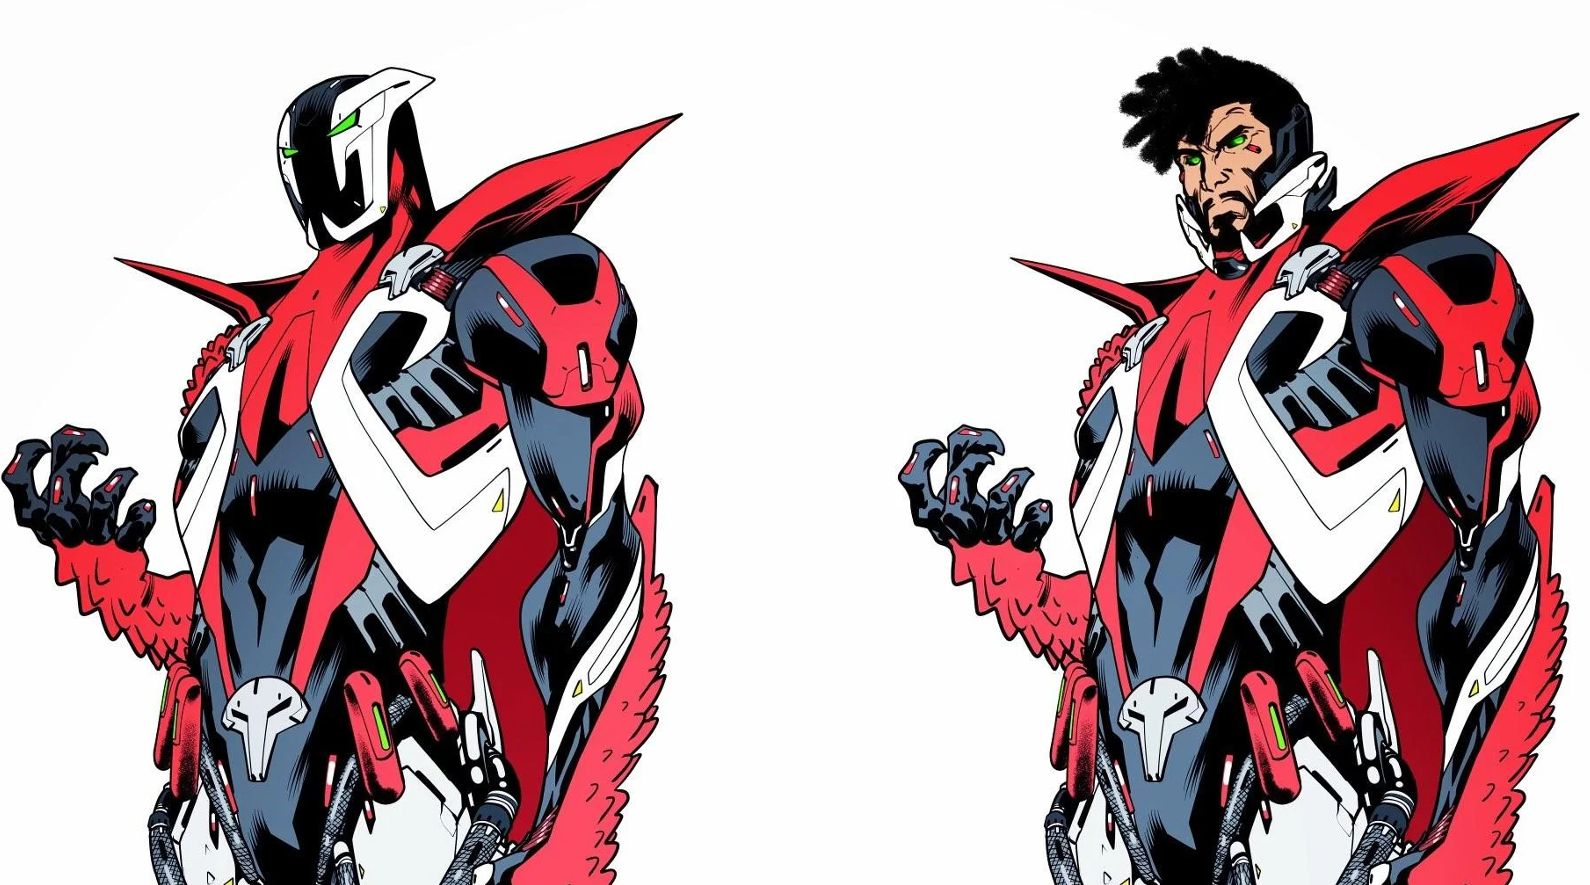 Ze Carlos concept art for the new futuristic version of Spawn